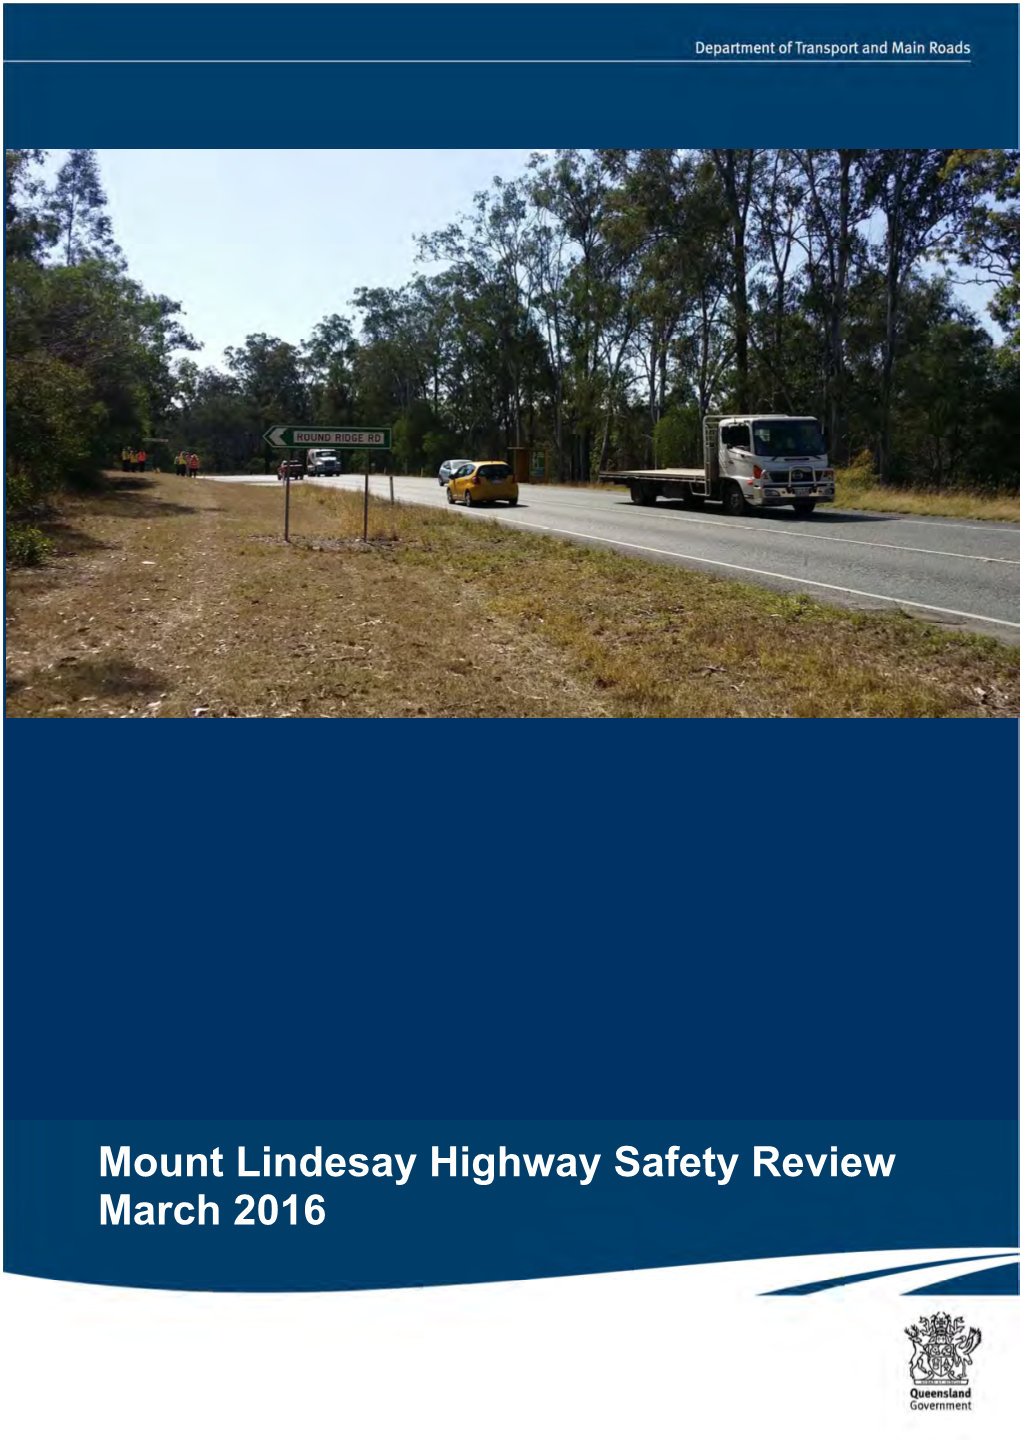 Mount Lindesay Highway Safety Review March 2016